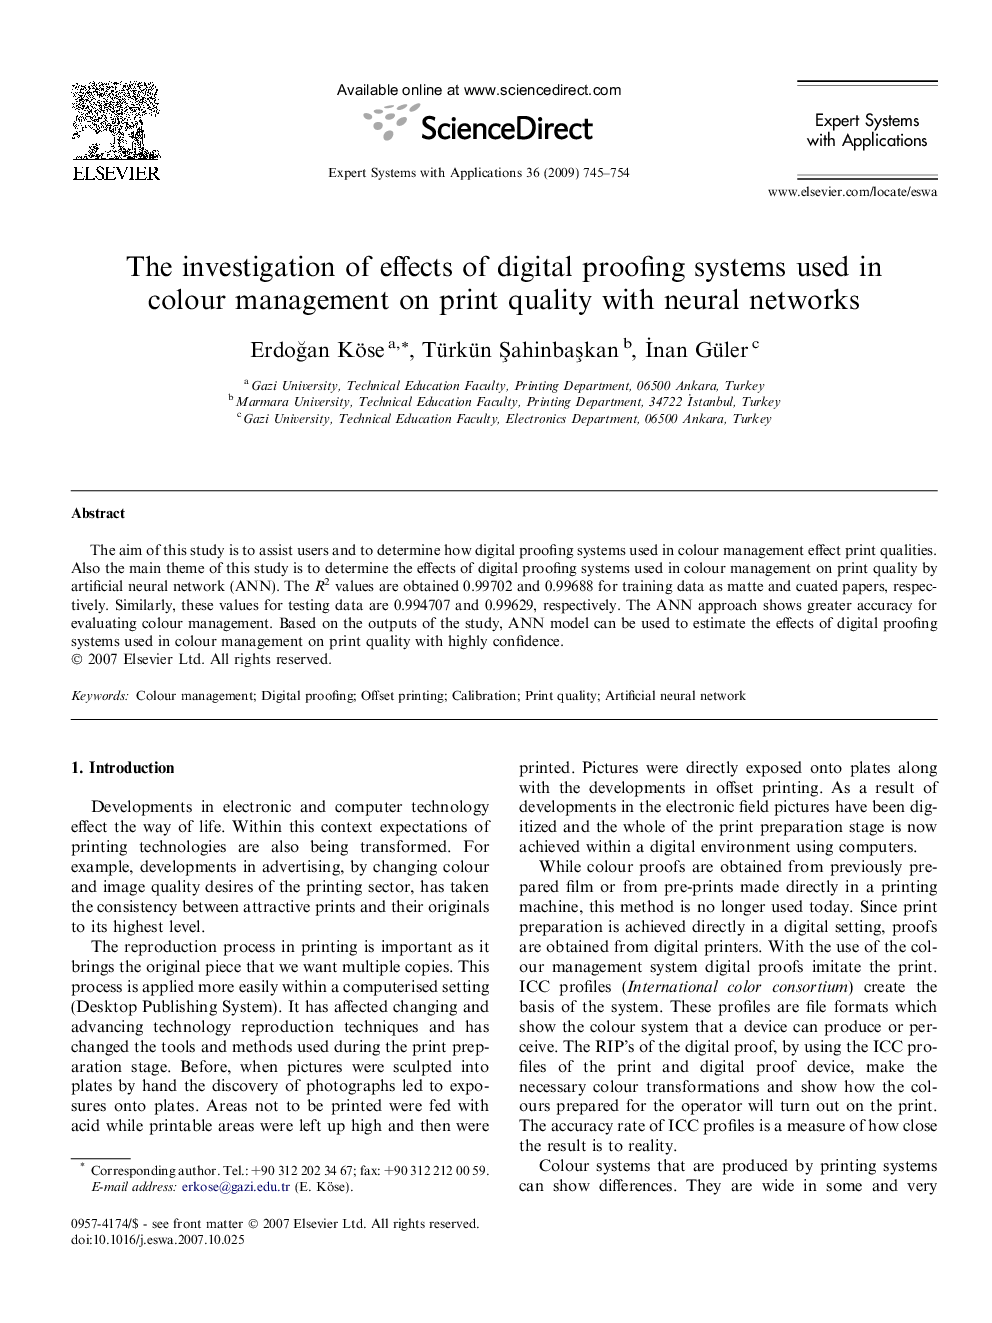 The investigation of effects of digital proofing systems used in colour management on print quality with neural networks